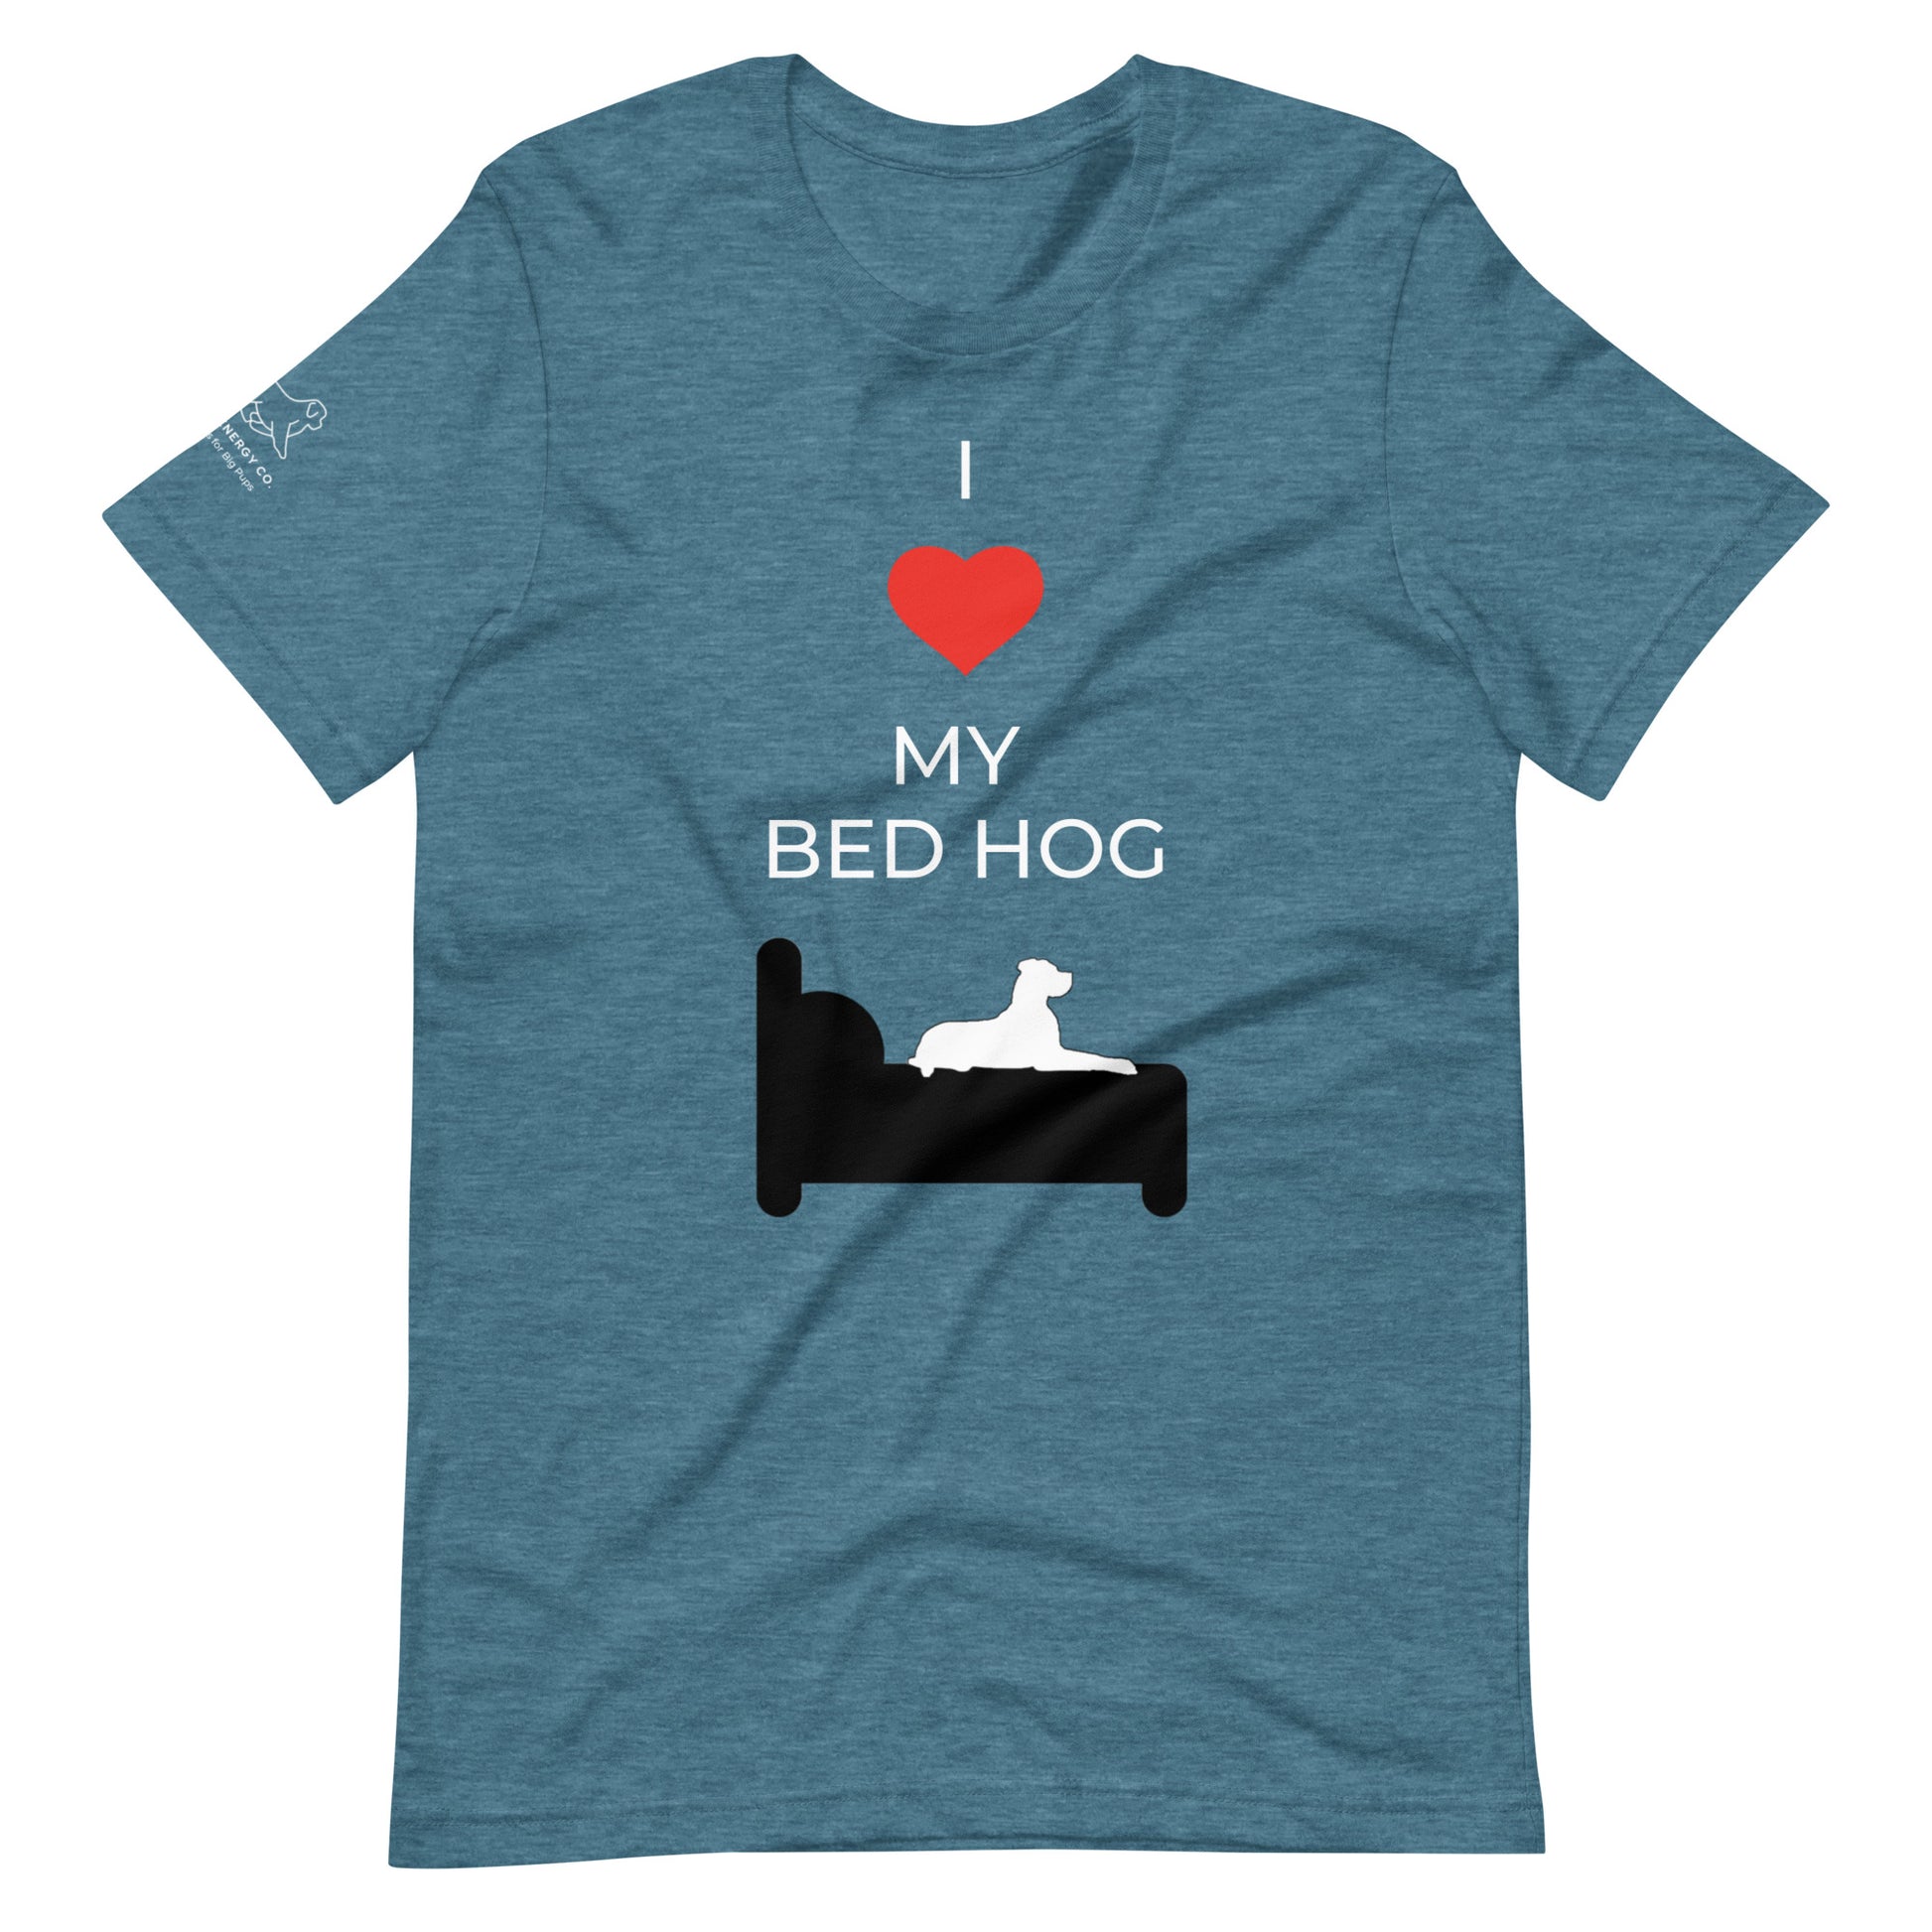 Front of a heather deep teal t-shirt that reads "I love my bed hog" in white text over an illustration that is the white silhouette of a large dog laying on the dark silhouette of a bed. The word "love" is replaced by a red heart symbol.